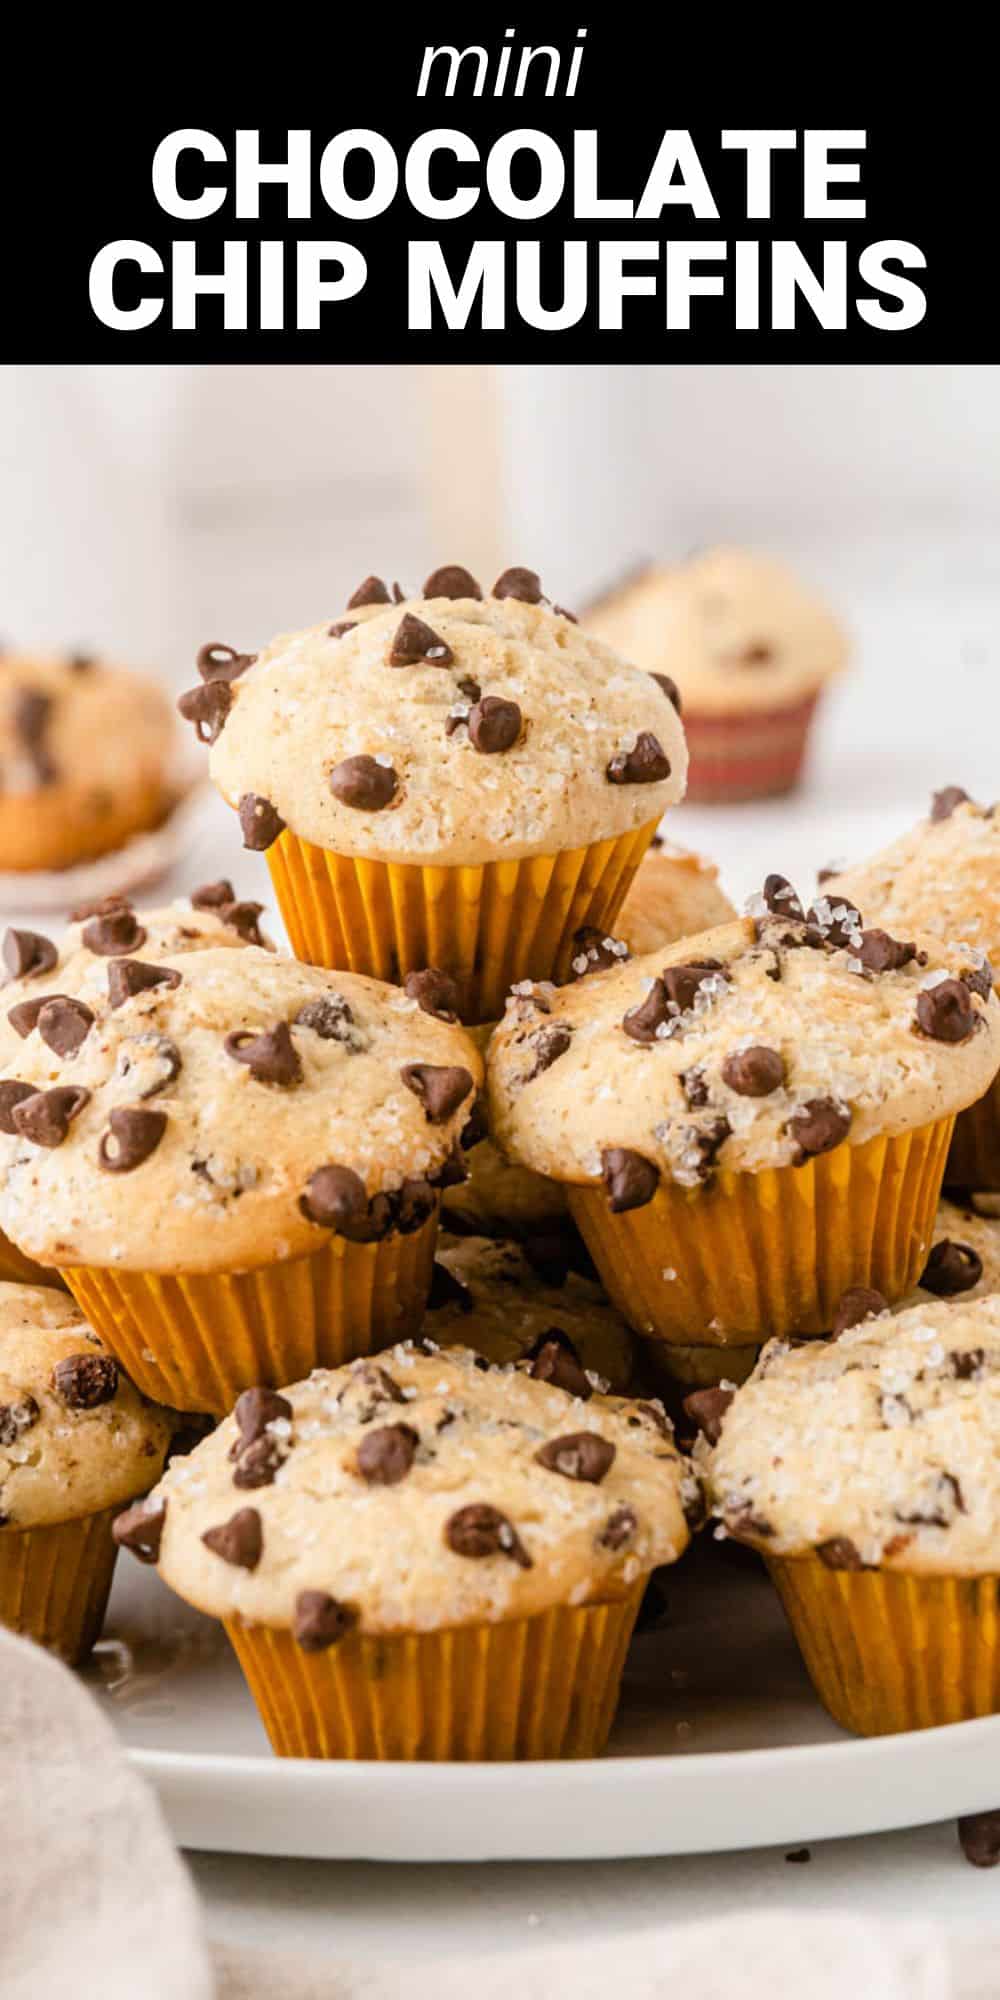 These mini chocolate chip muffins are a tasty treat that’s perfect for a quick snack or breakfast, but so delicious that you could make them for a party. Bursting with chocolate flavor, these cute little muffins will be a big hit with the whole family!